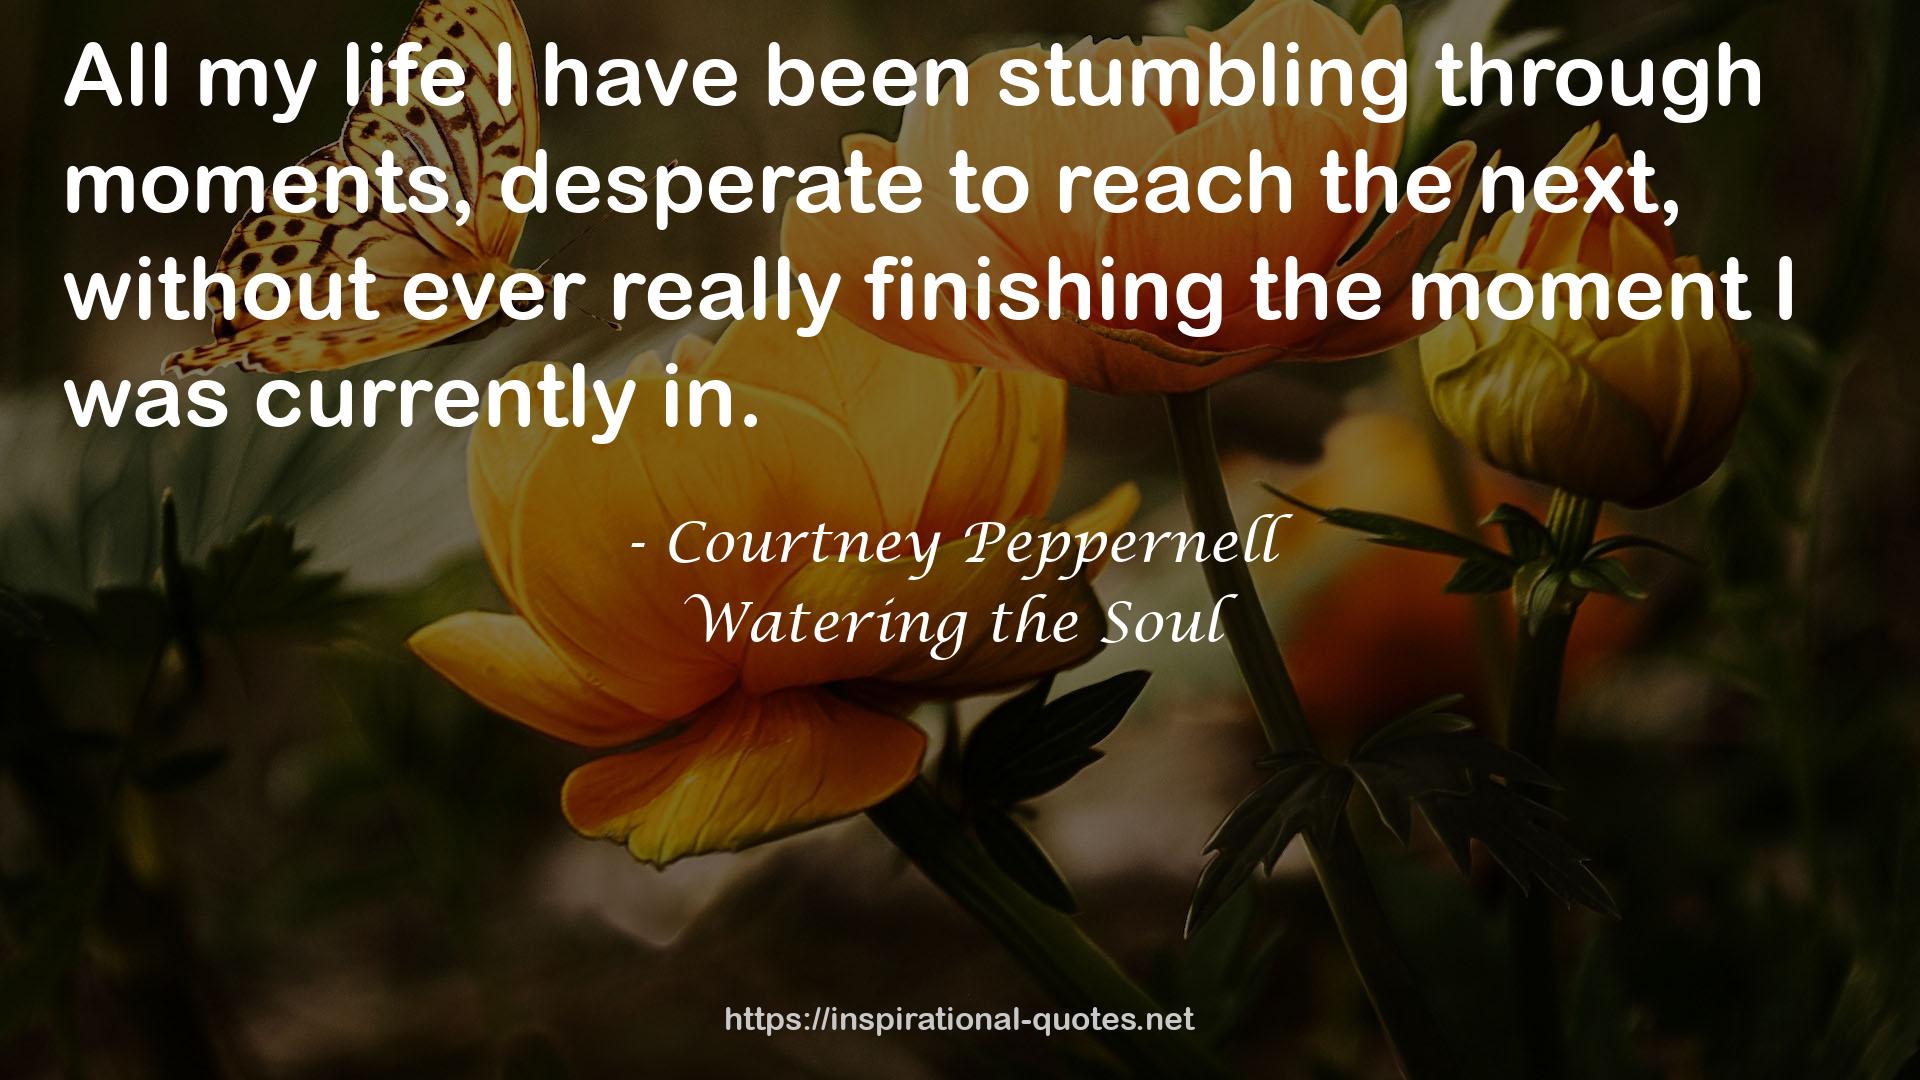 Watering the Soul QUOTES